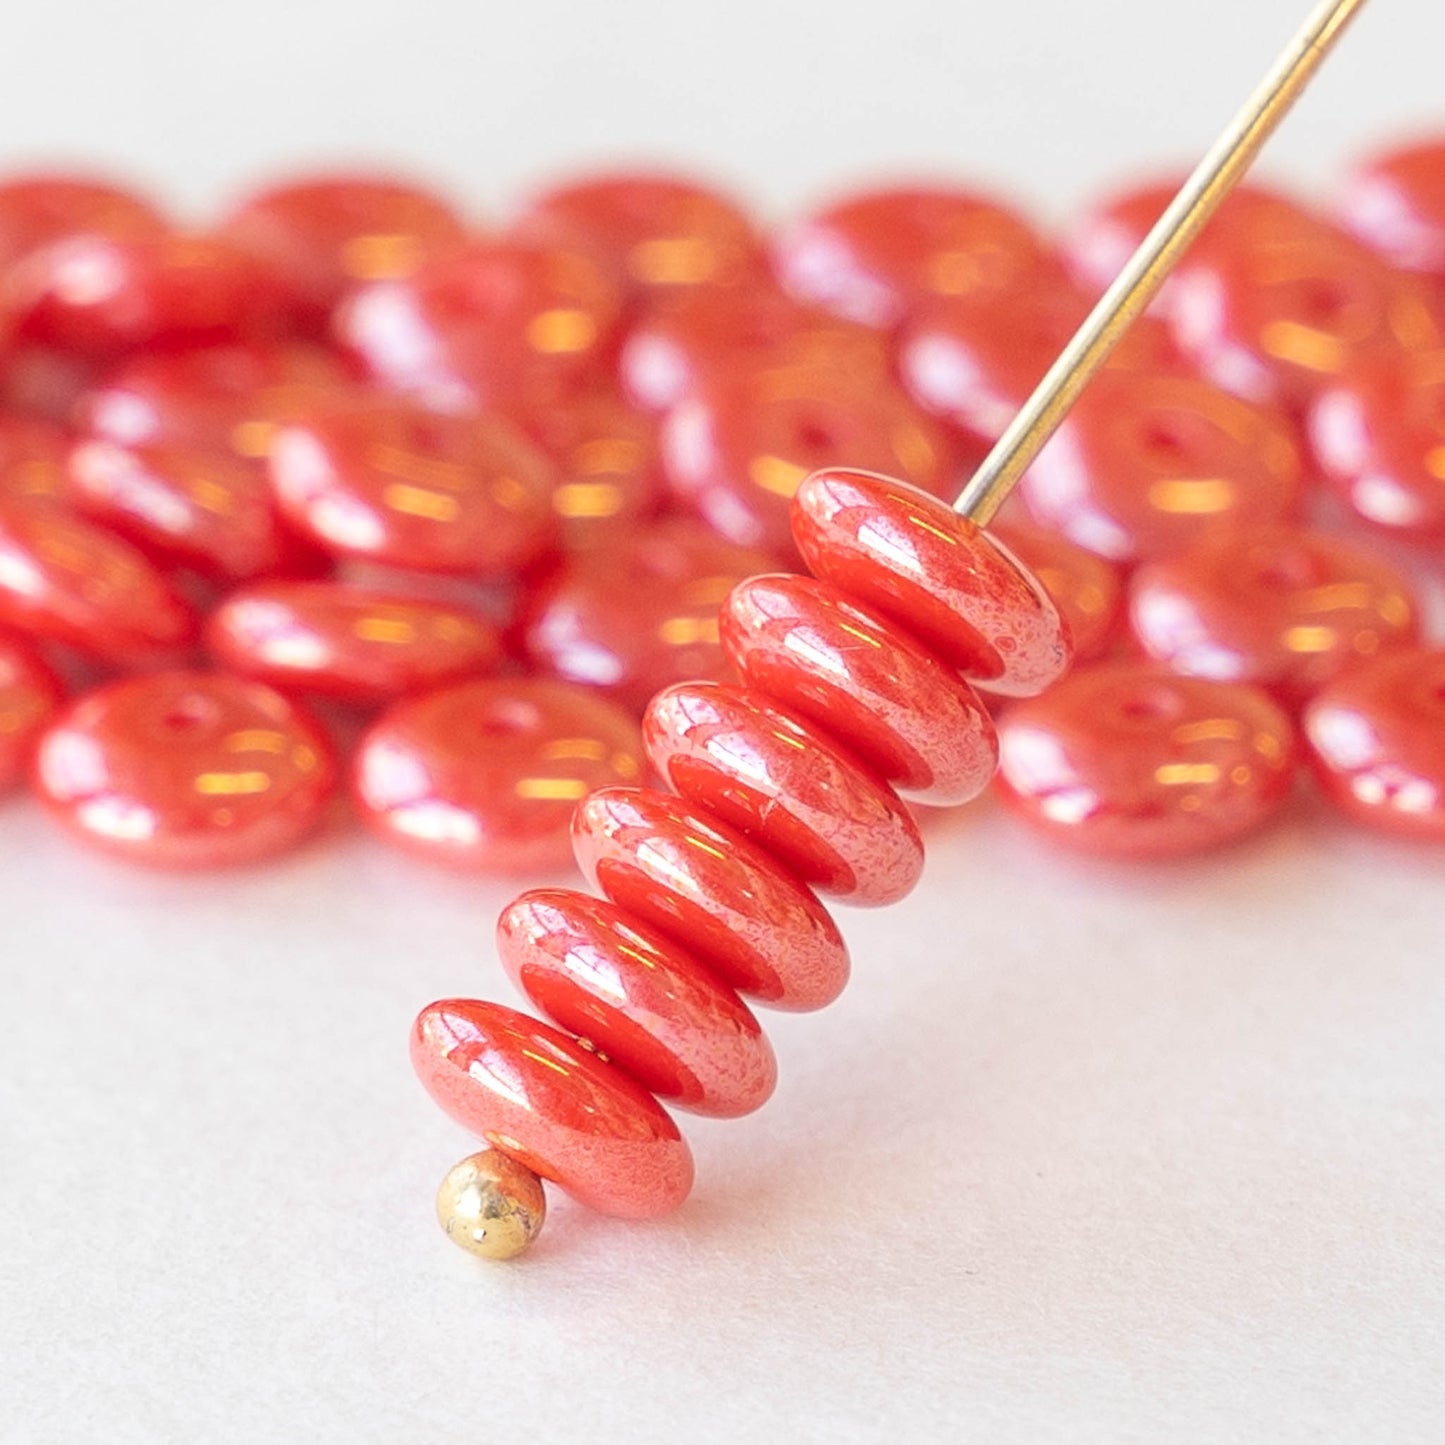 6mm Glass Rondelle Beads - Coral Red Luster - 50 Beads